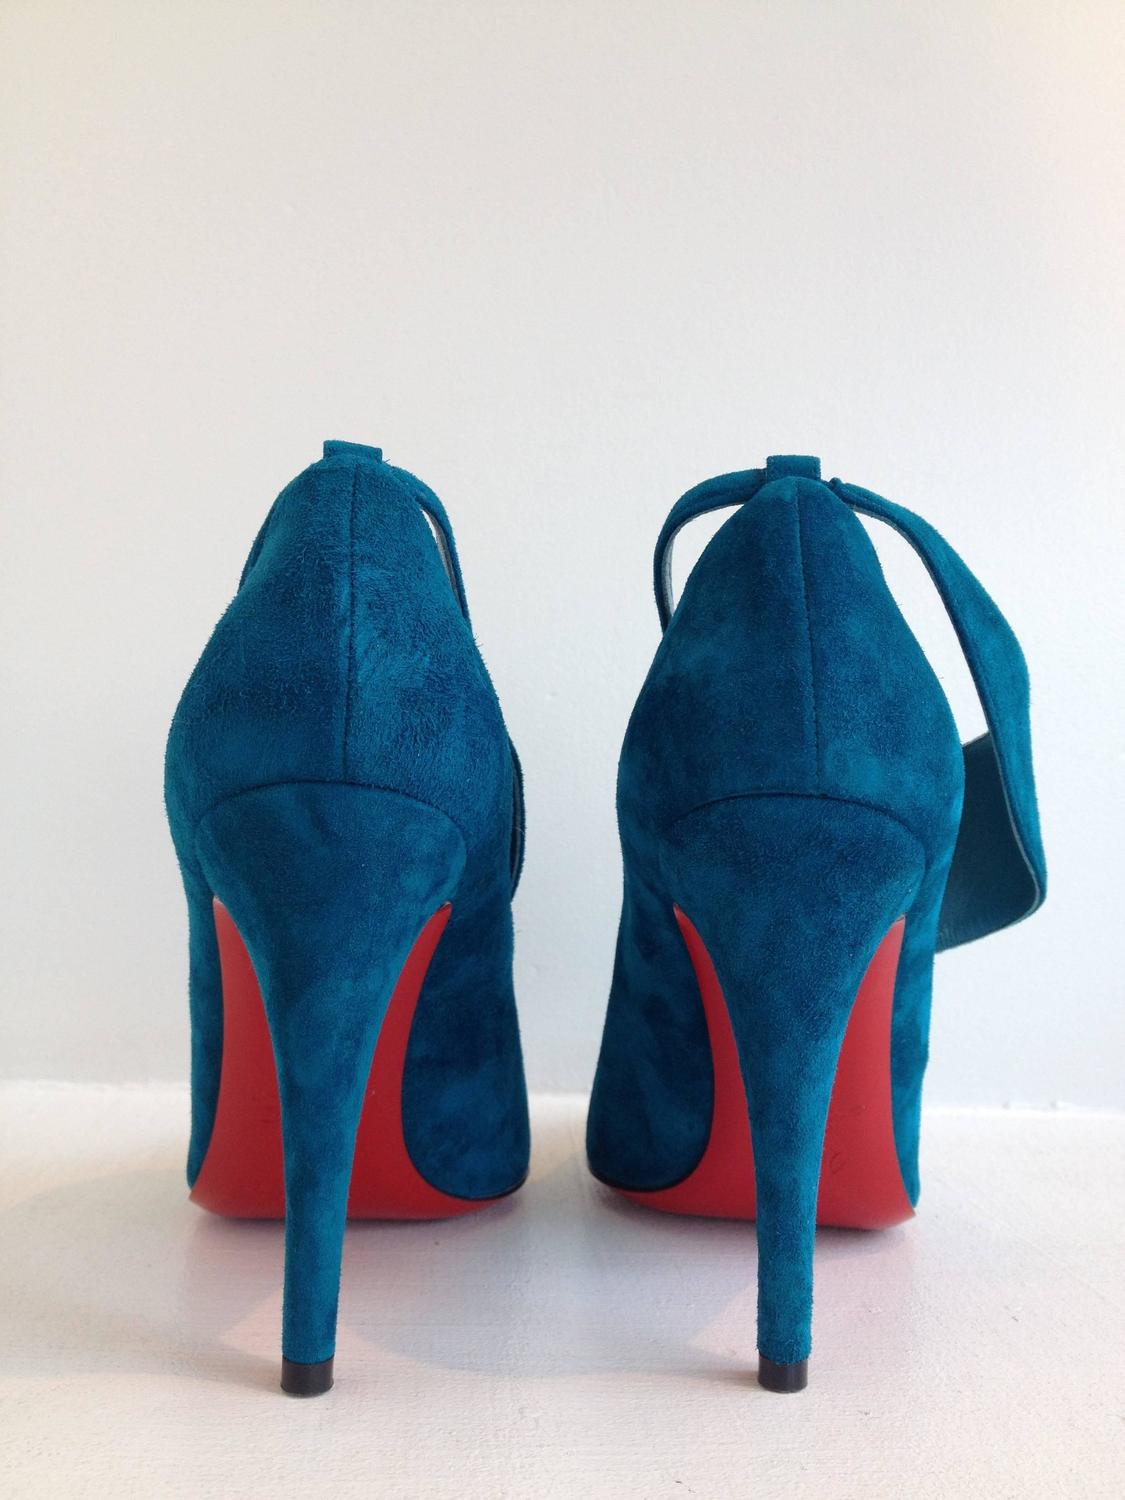 Christian Louboutin Peacock Blue Suede Heels at 1stdibs